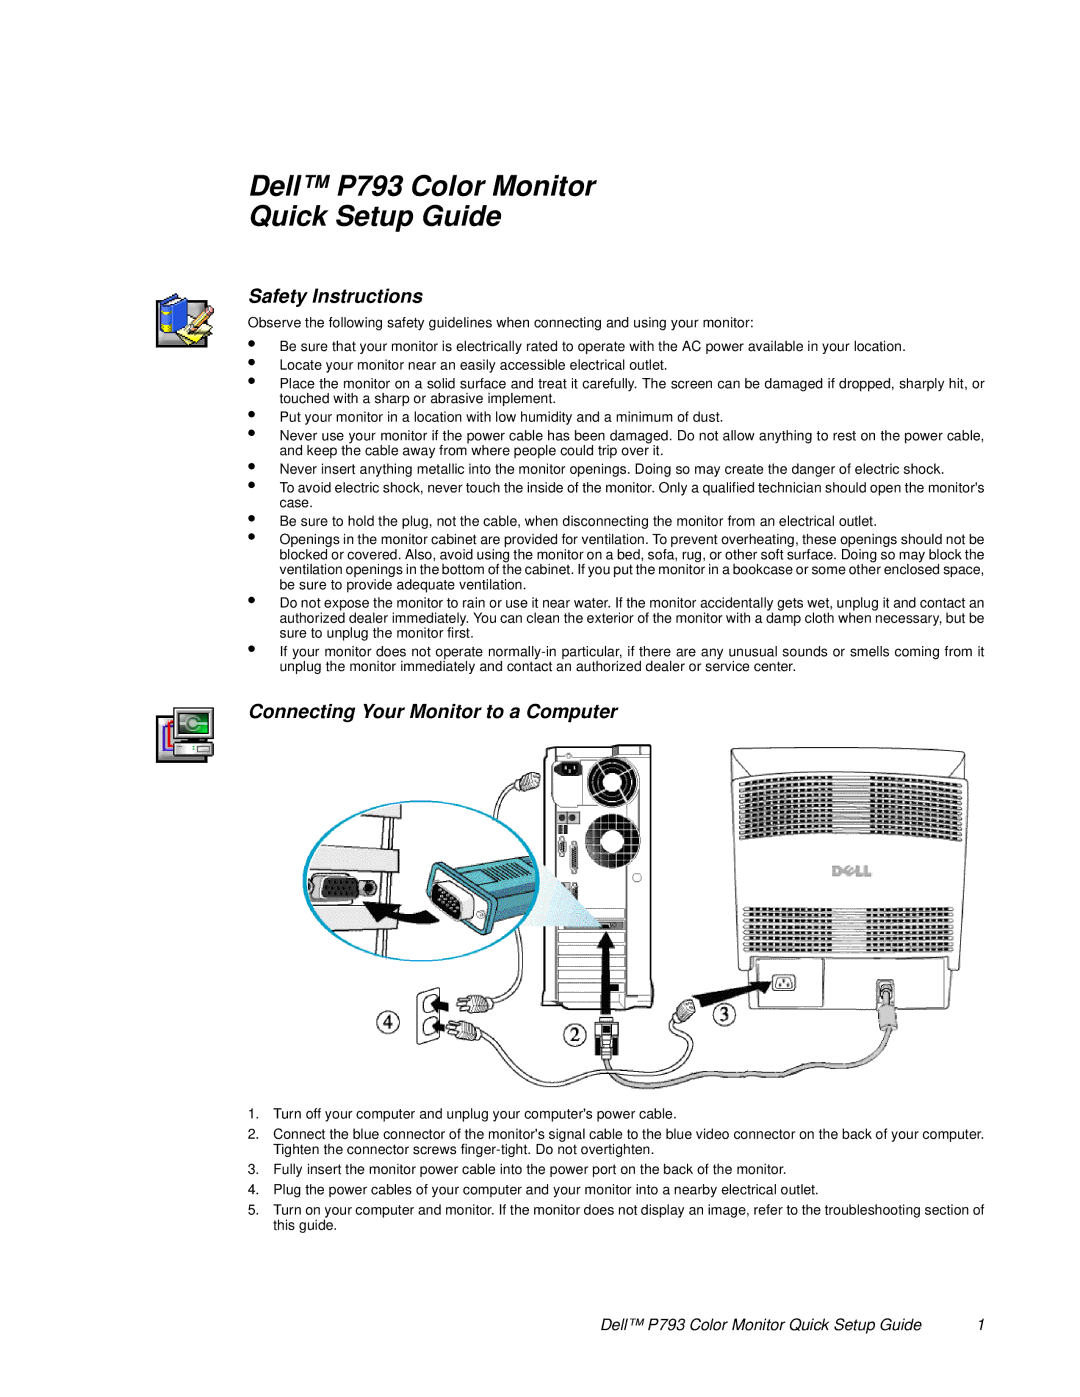 Dell P793 setup guide Safety Instructions, Connecting Your Monitor to a Computer 